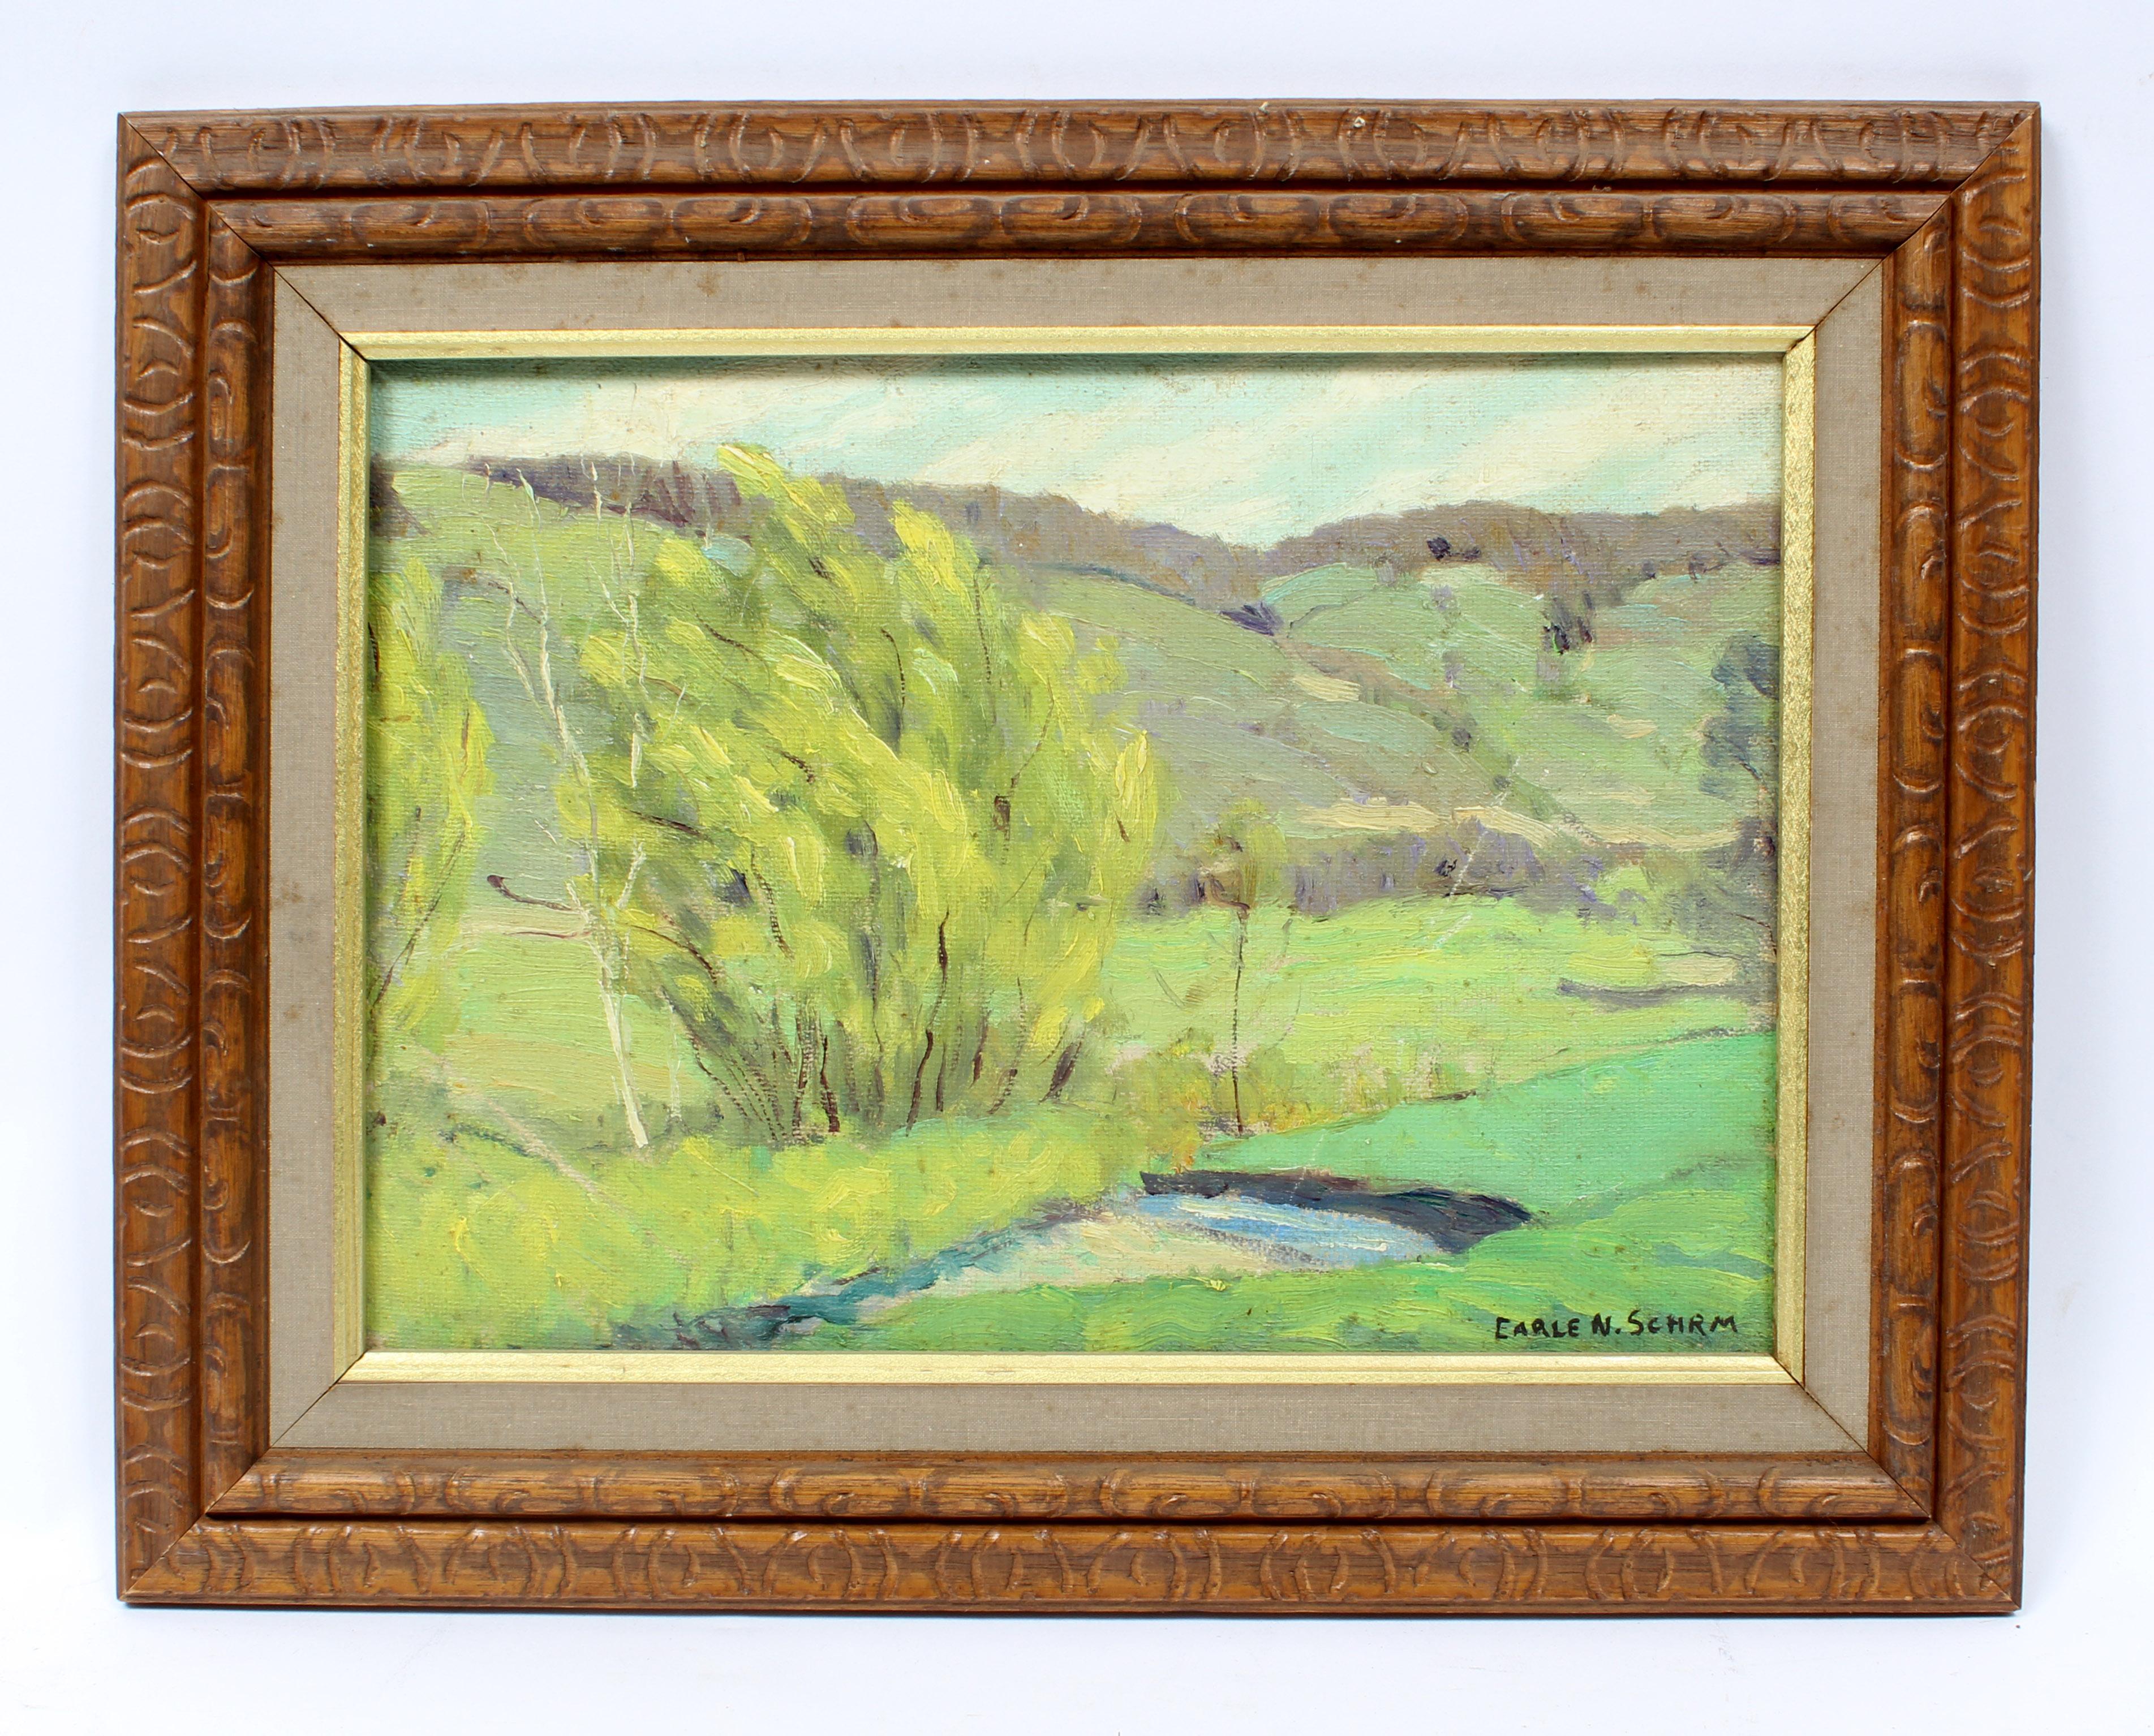 An original oil painting by American artist Earl Sherm depicting a lovely pastoral scene in spring.

This work comes framed in a period frame which enhances the presentation on the wall.